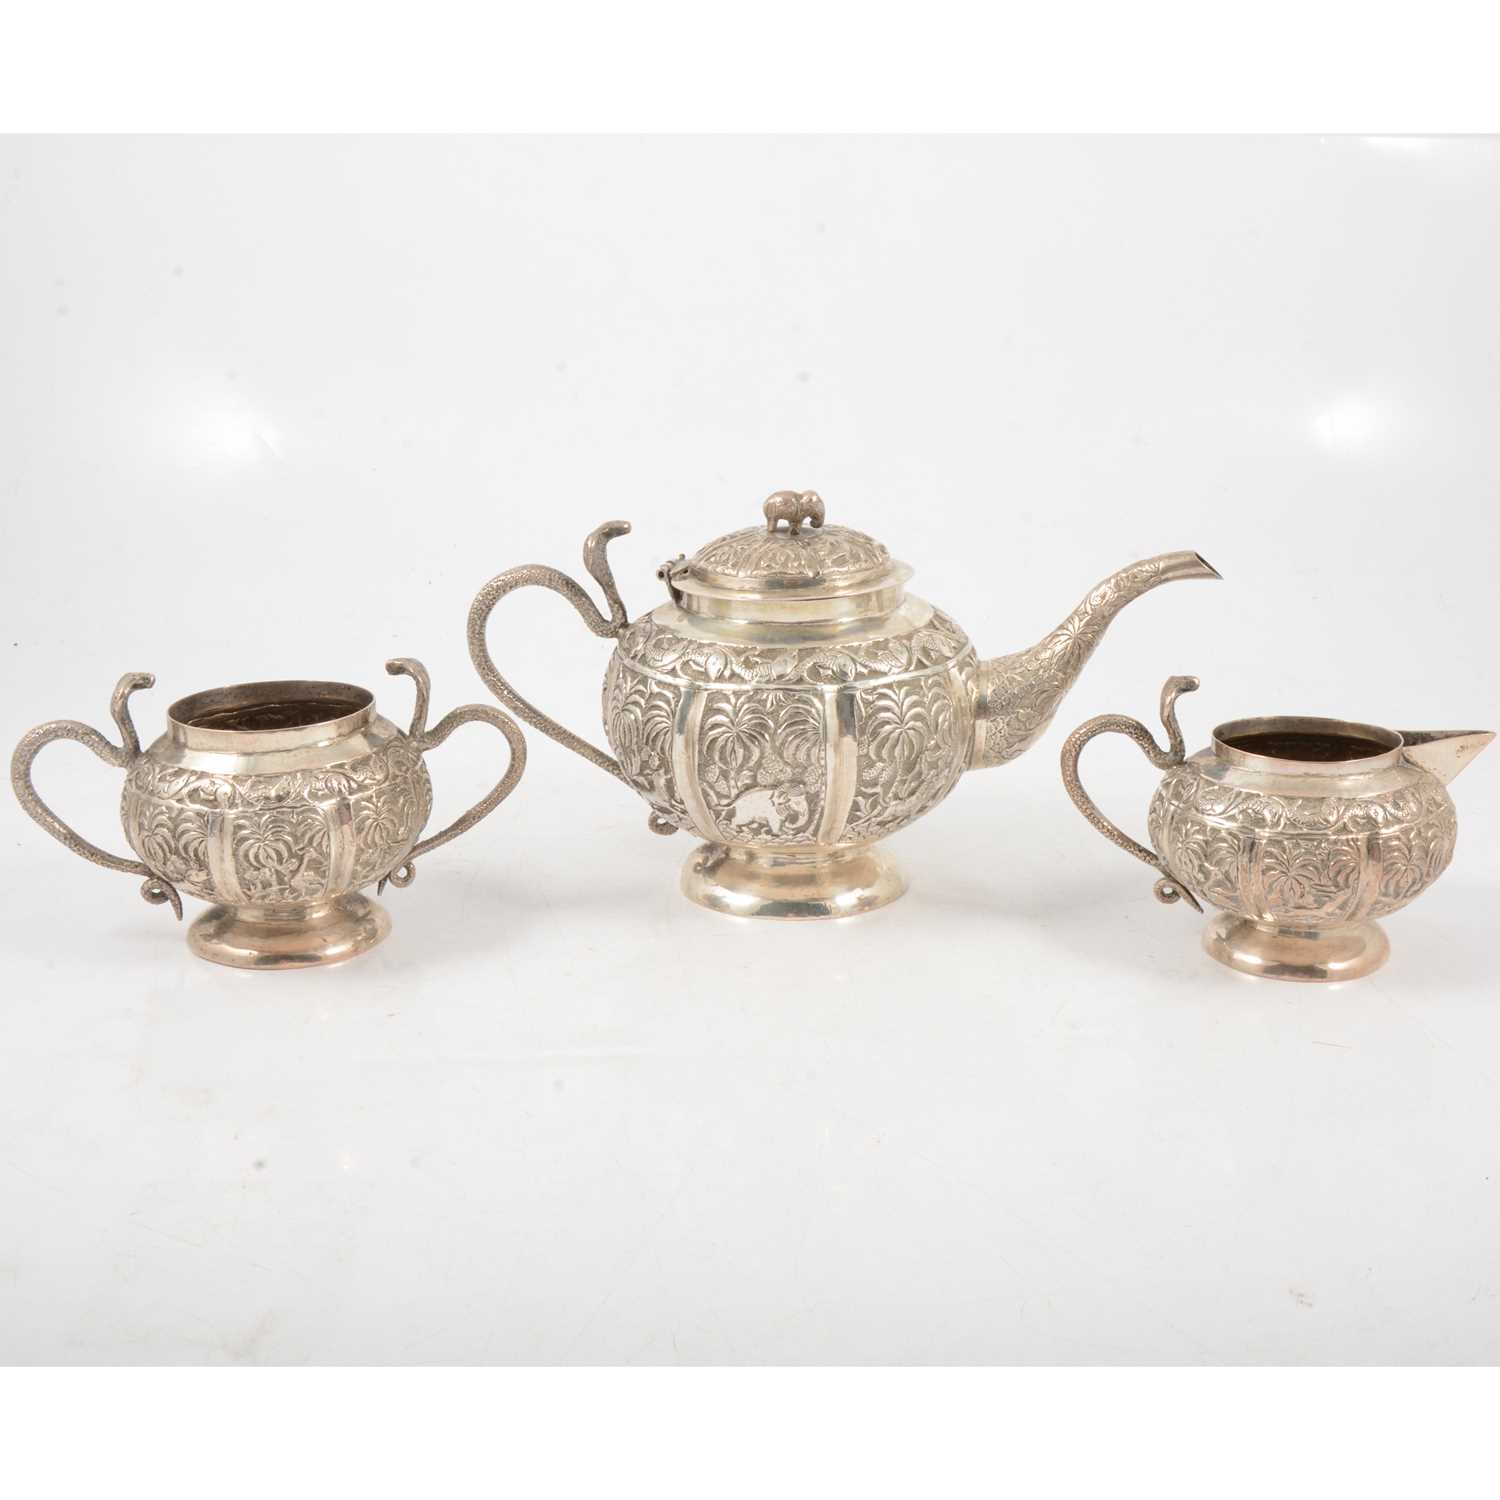 Lot 274 - An Indian silver-plated three piece teaset.